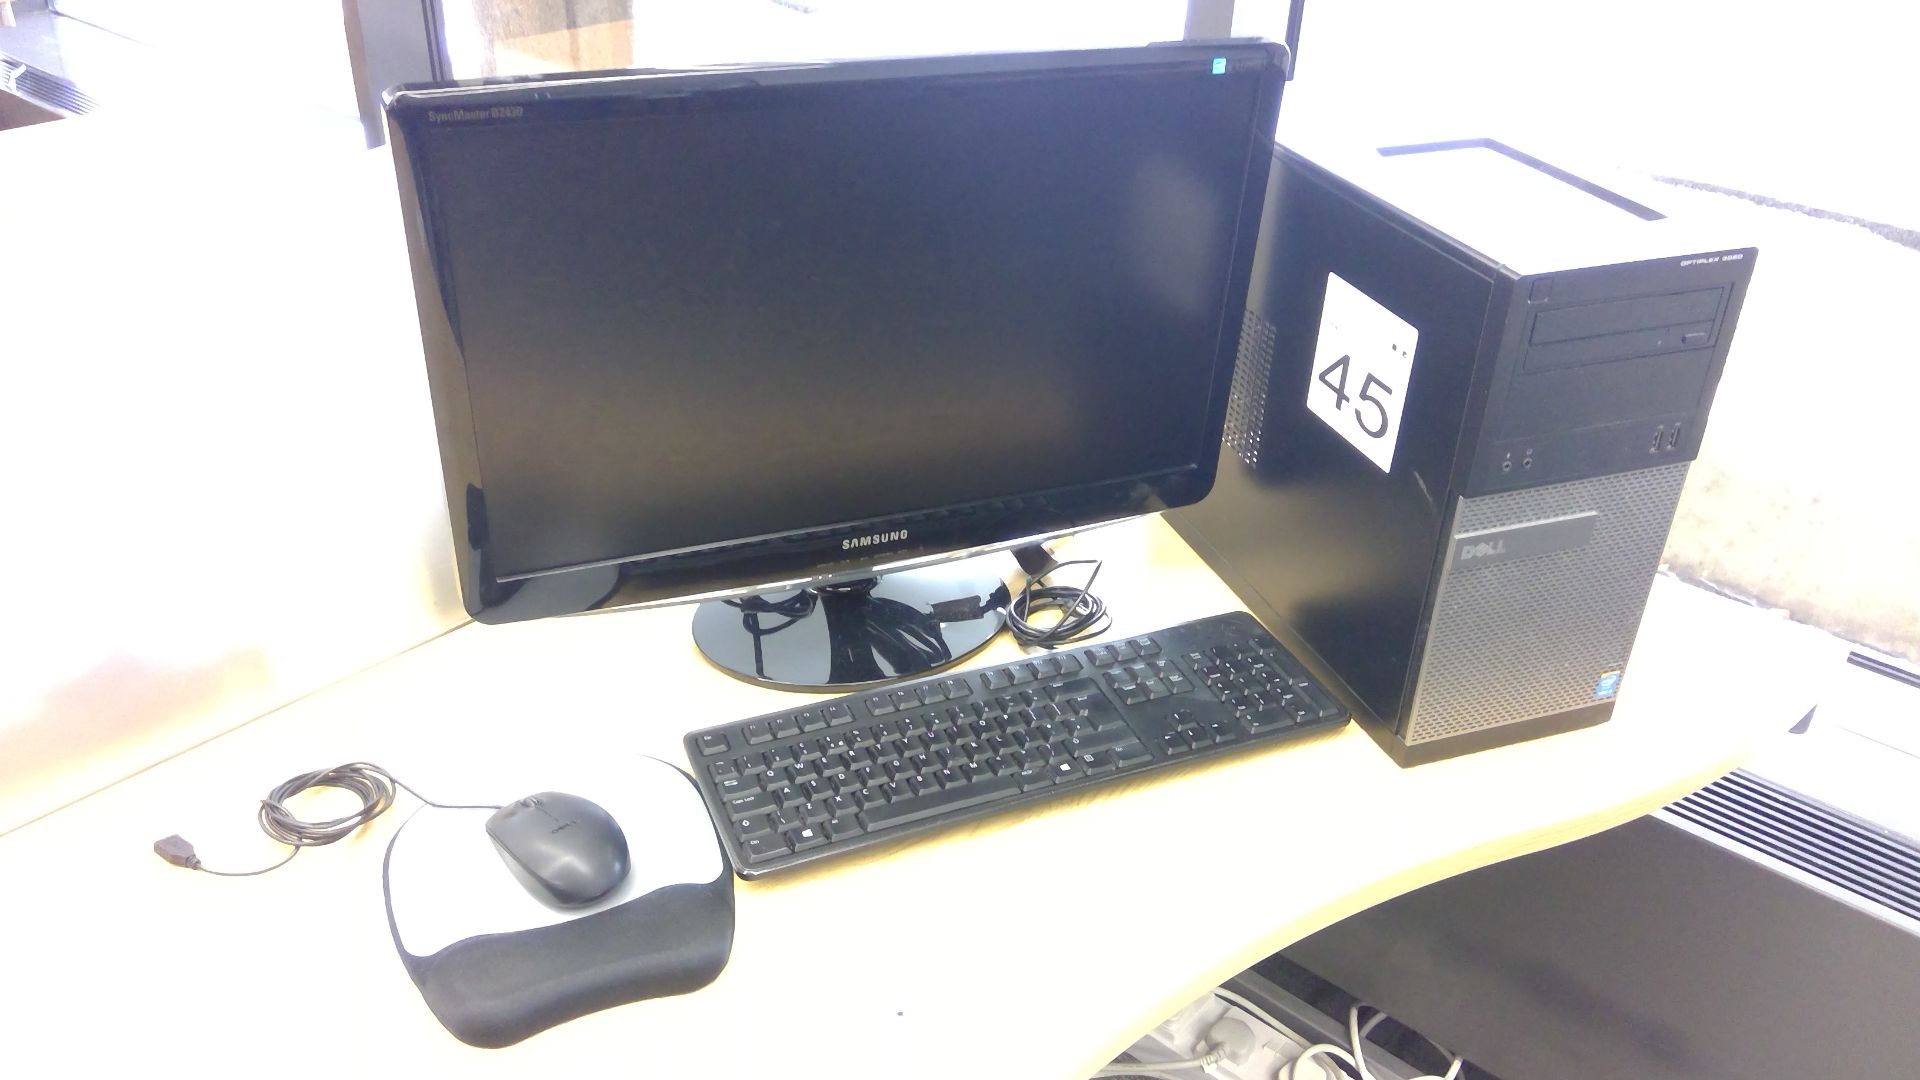 Dell Optiplex 3020 Core i3 PC with Samsung 24 inch monitor, keyboard and mouse